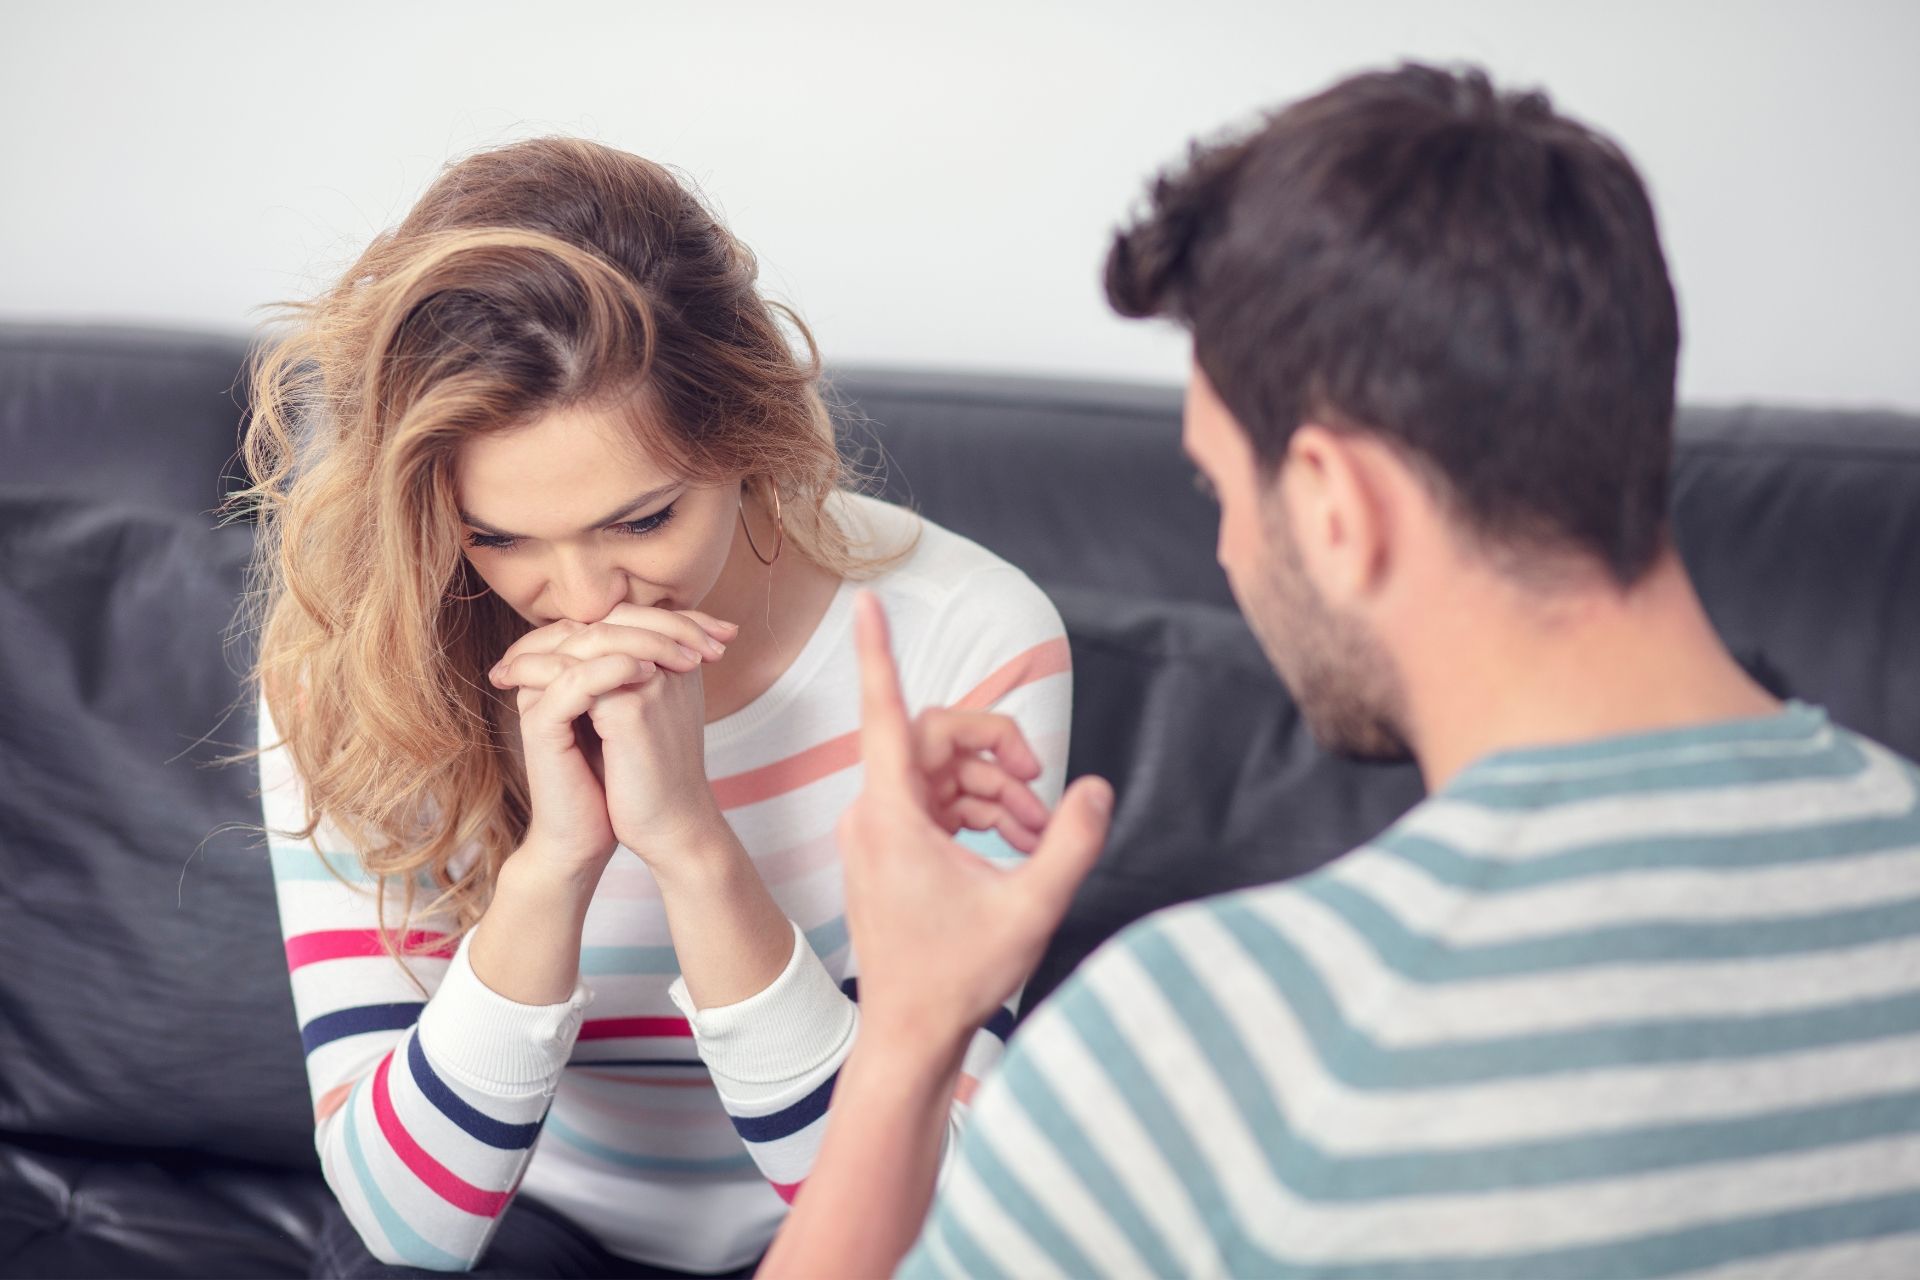 24 guidelines for resolving conflicts in marriage